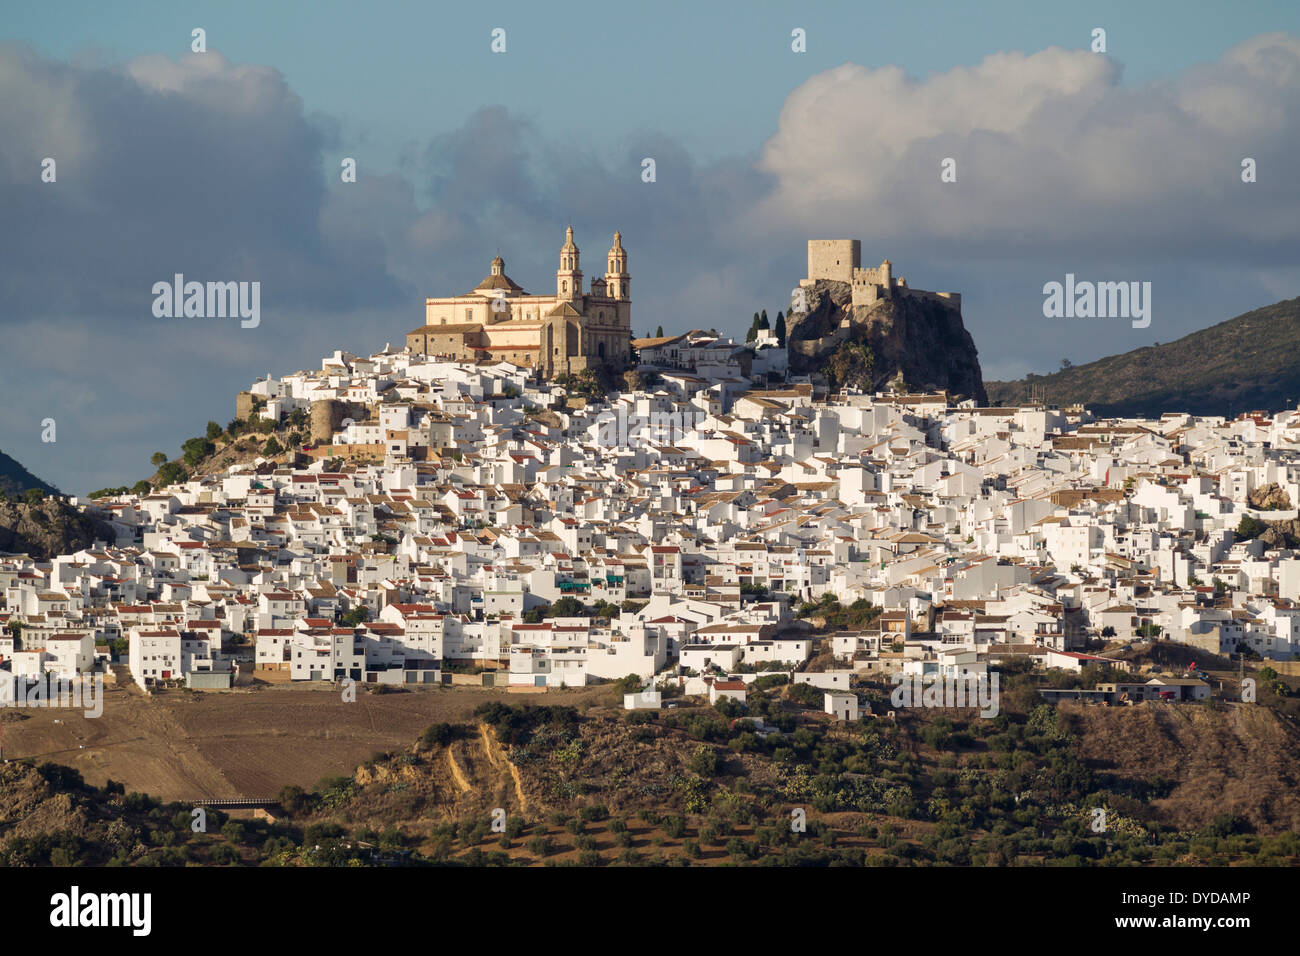 The hilltop White Town of Olvera with La Encarnación church and the Moorish castle, Cádiz province, Andalusia, Spain Stock Photo